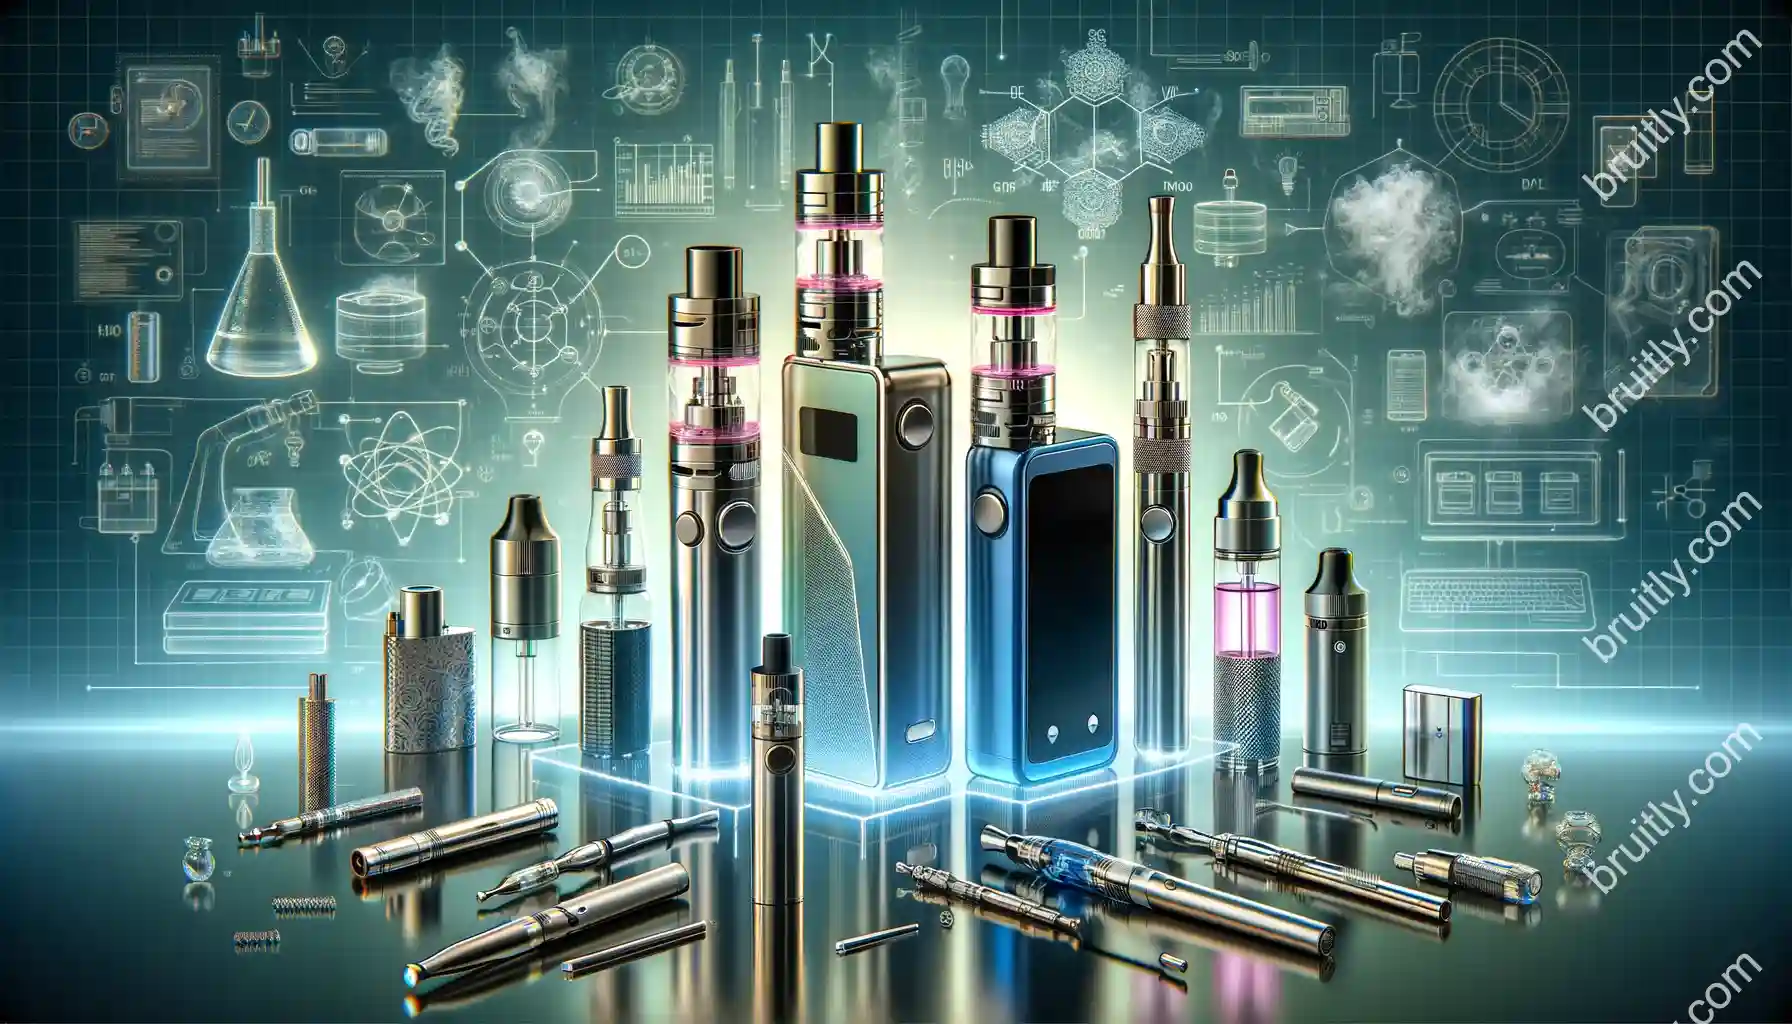 The Science Behind Vaping